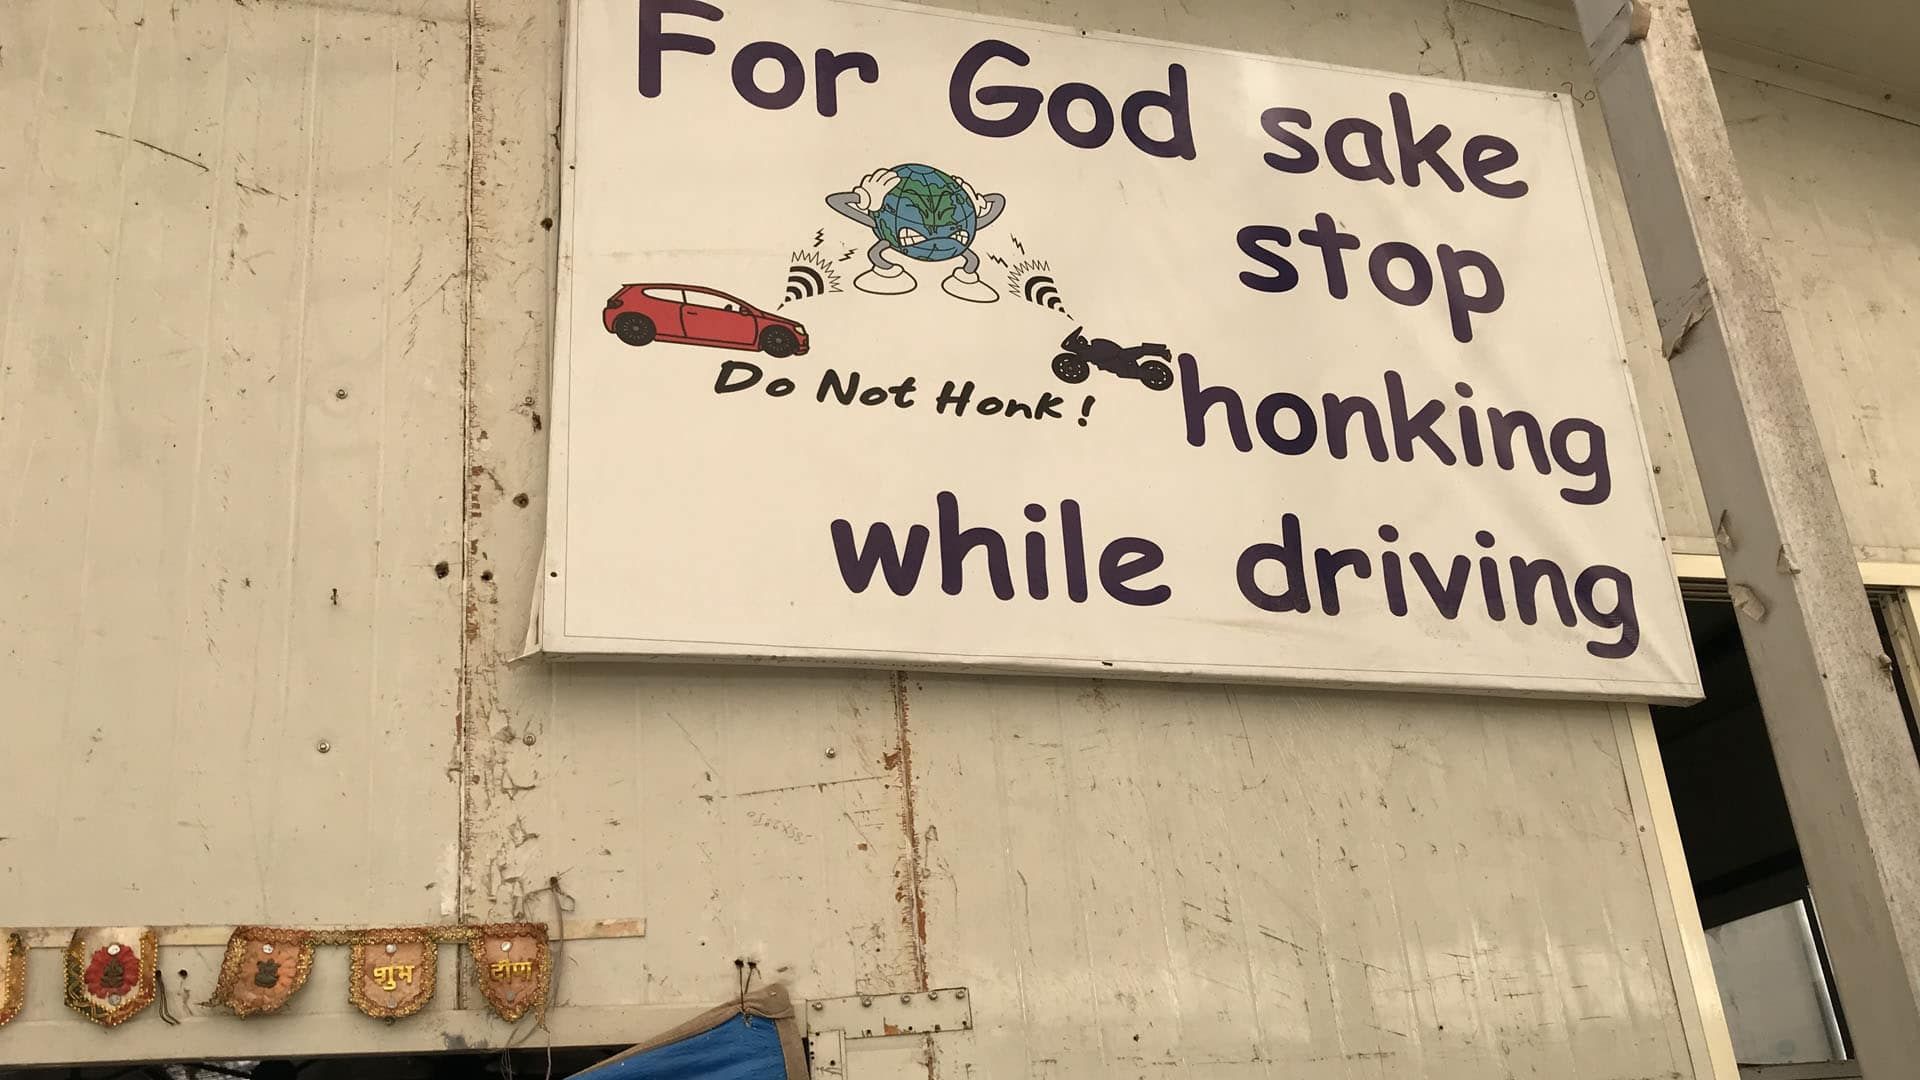 An anti-honking sign hangs on the wall at the Earth Saviours Foundation just outside New Delhi. The foundation is active in caring for the homeless and several environmental causes, including noise pollution. Image by Chris Berdik. India, undated.